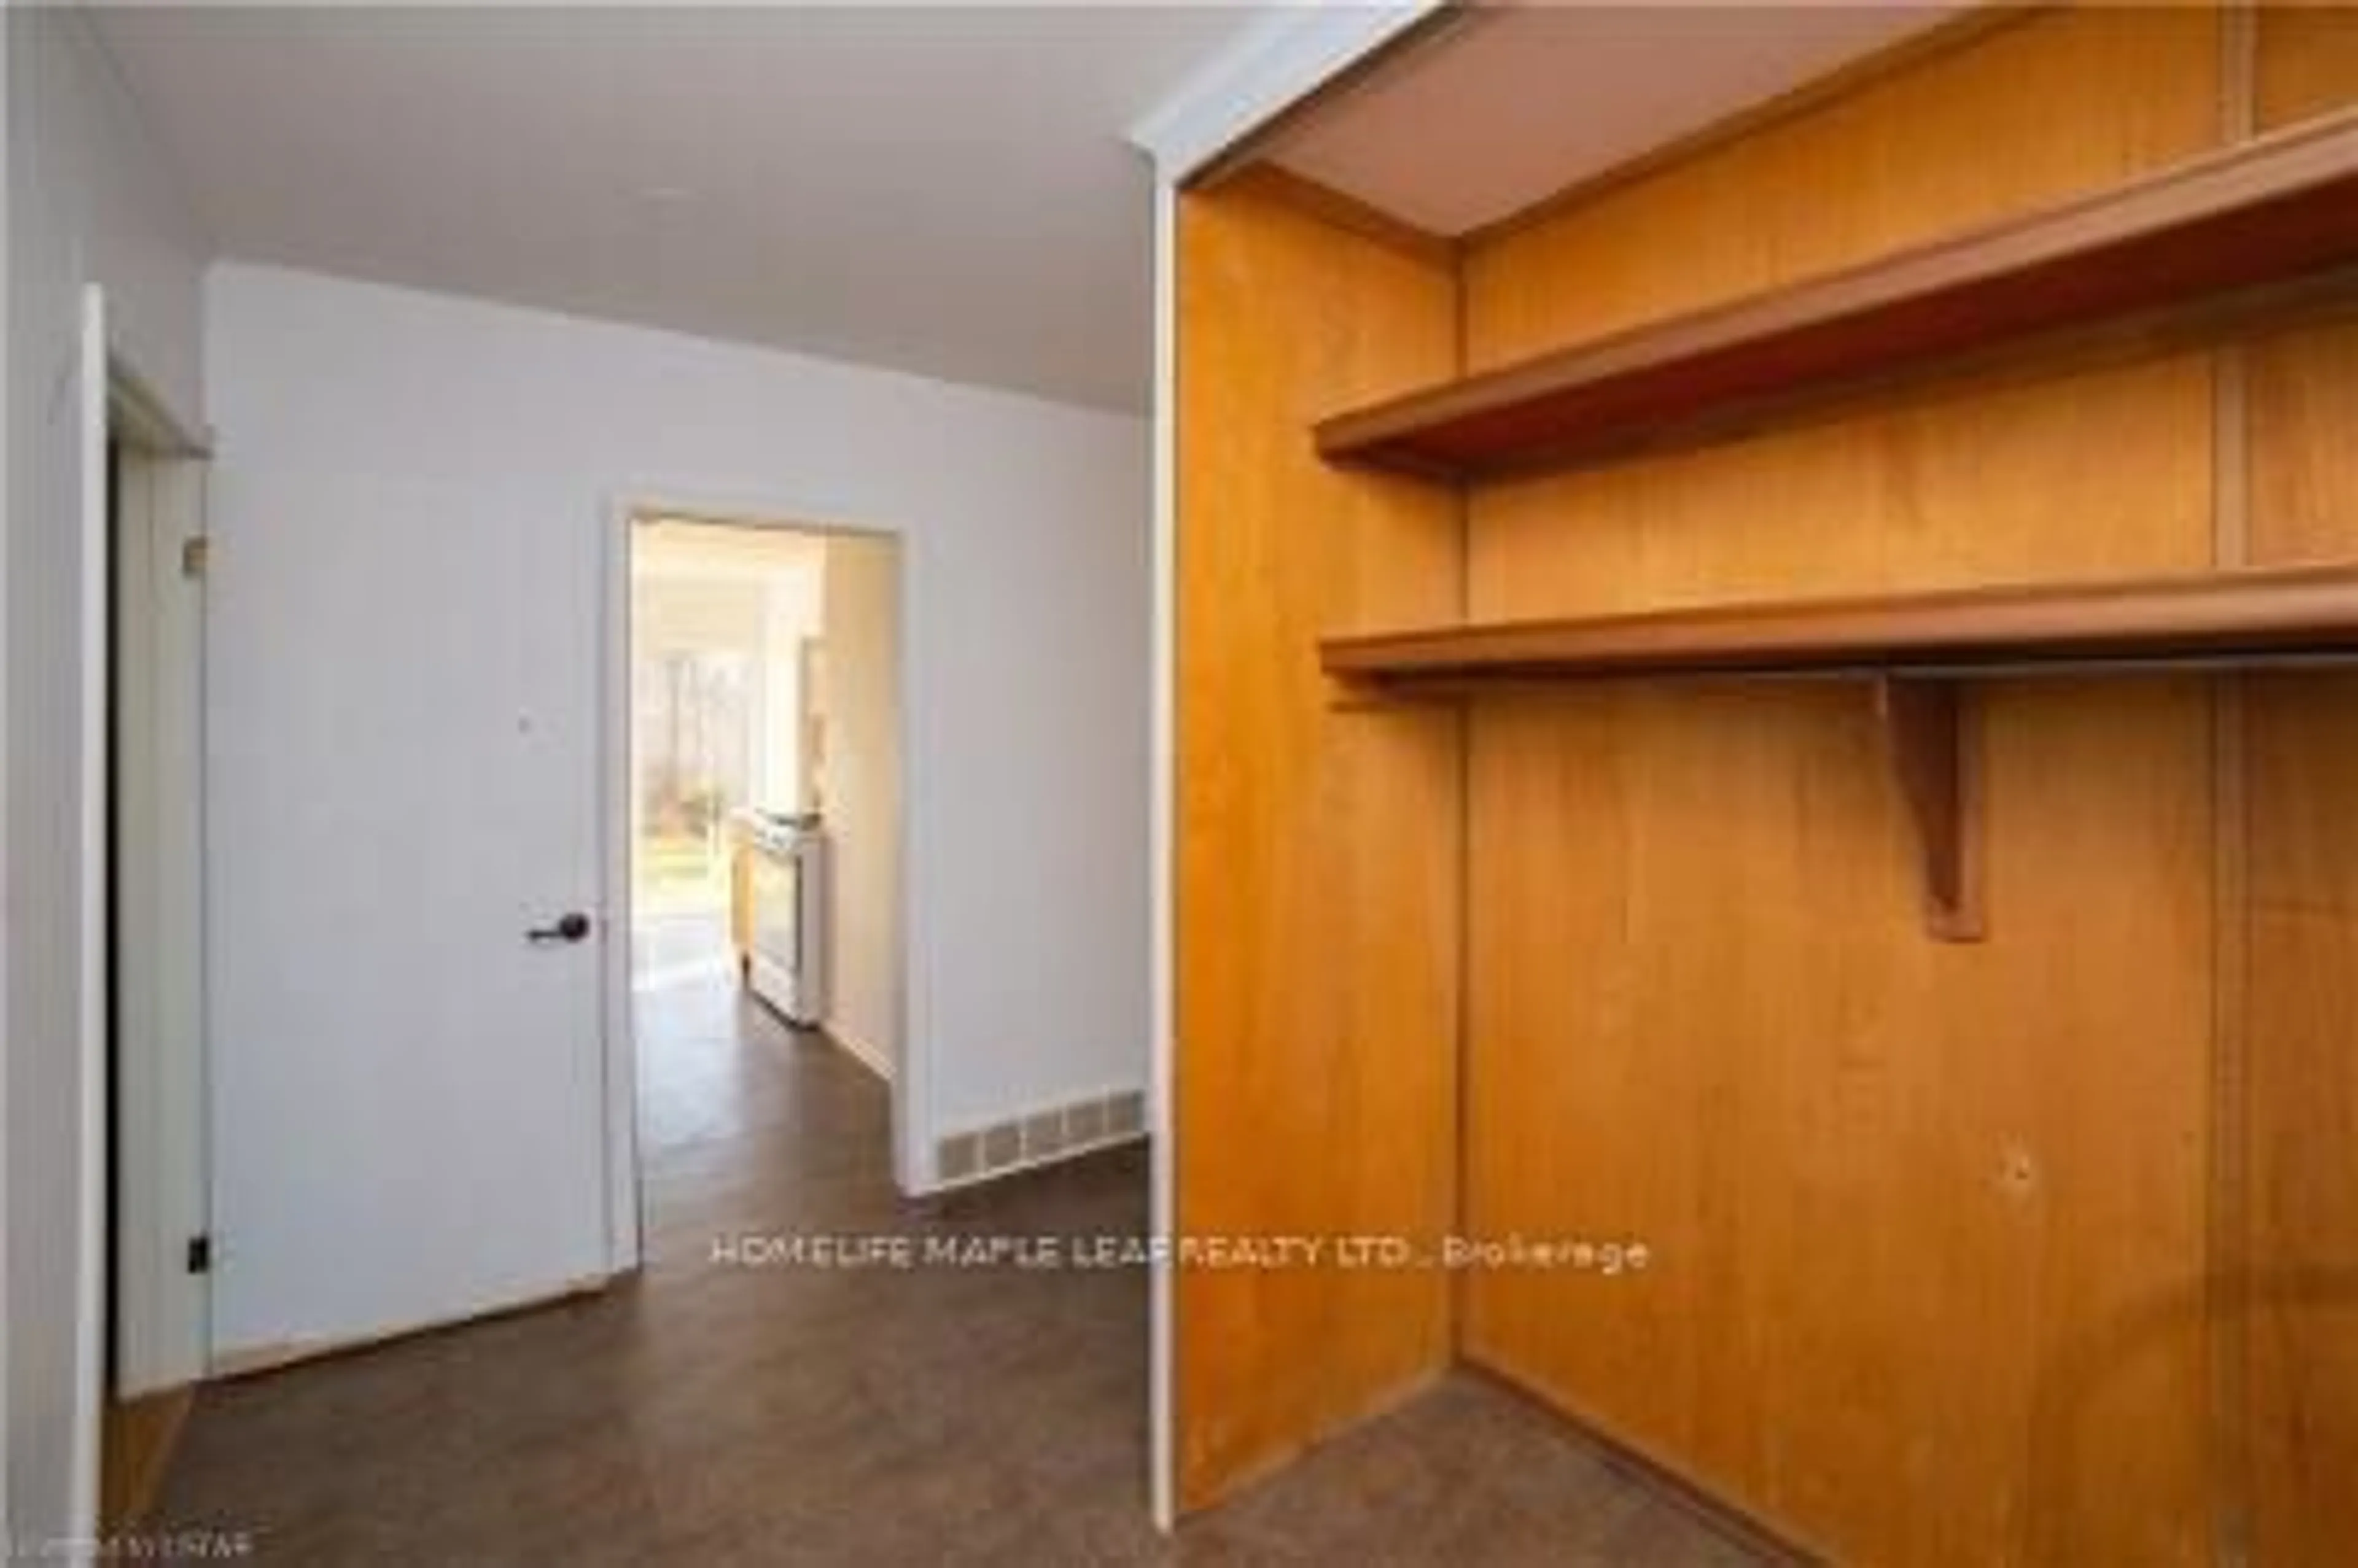 Storage room or clothes room or walk-in closet for 7269 Westminster Dr, London Ontario N6P 1N4